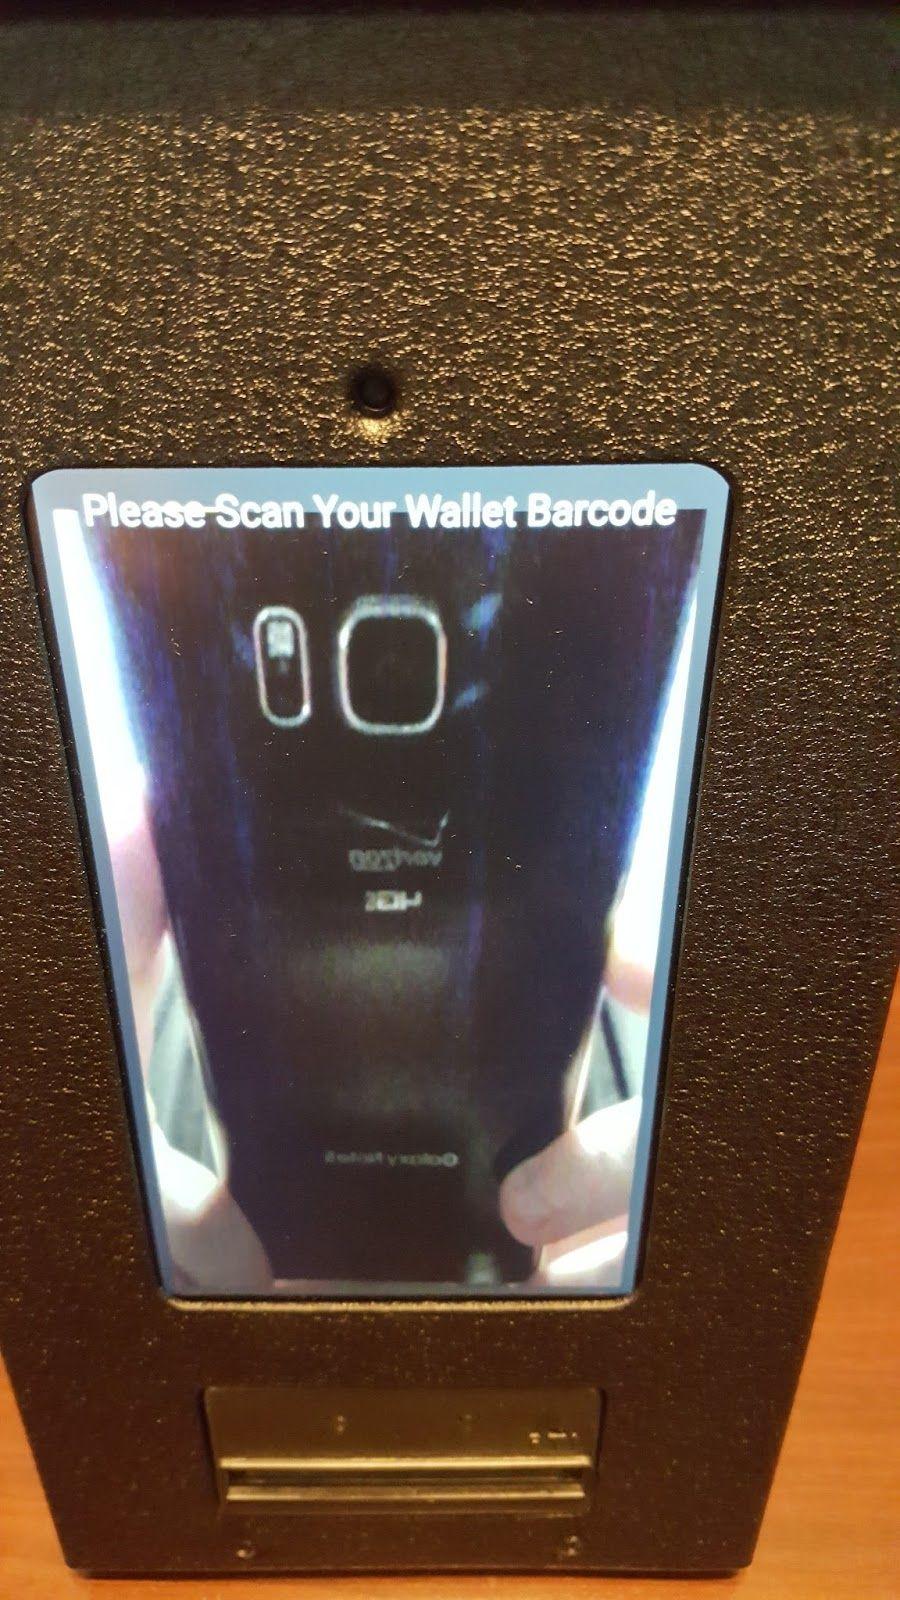 Scan your wallet qr code/address on your mobile